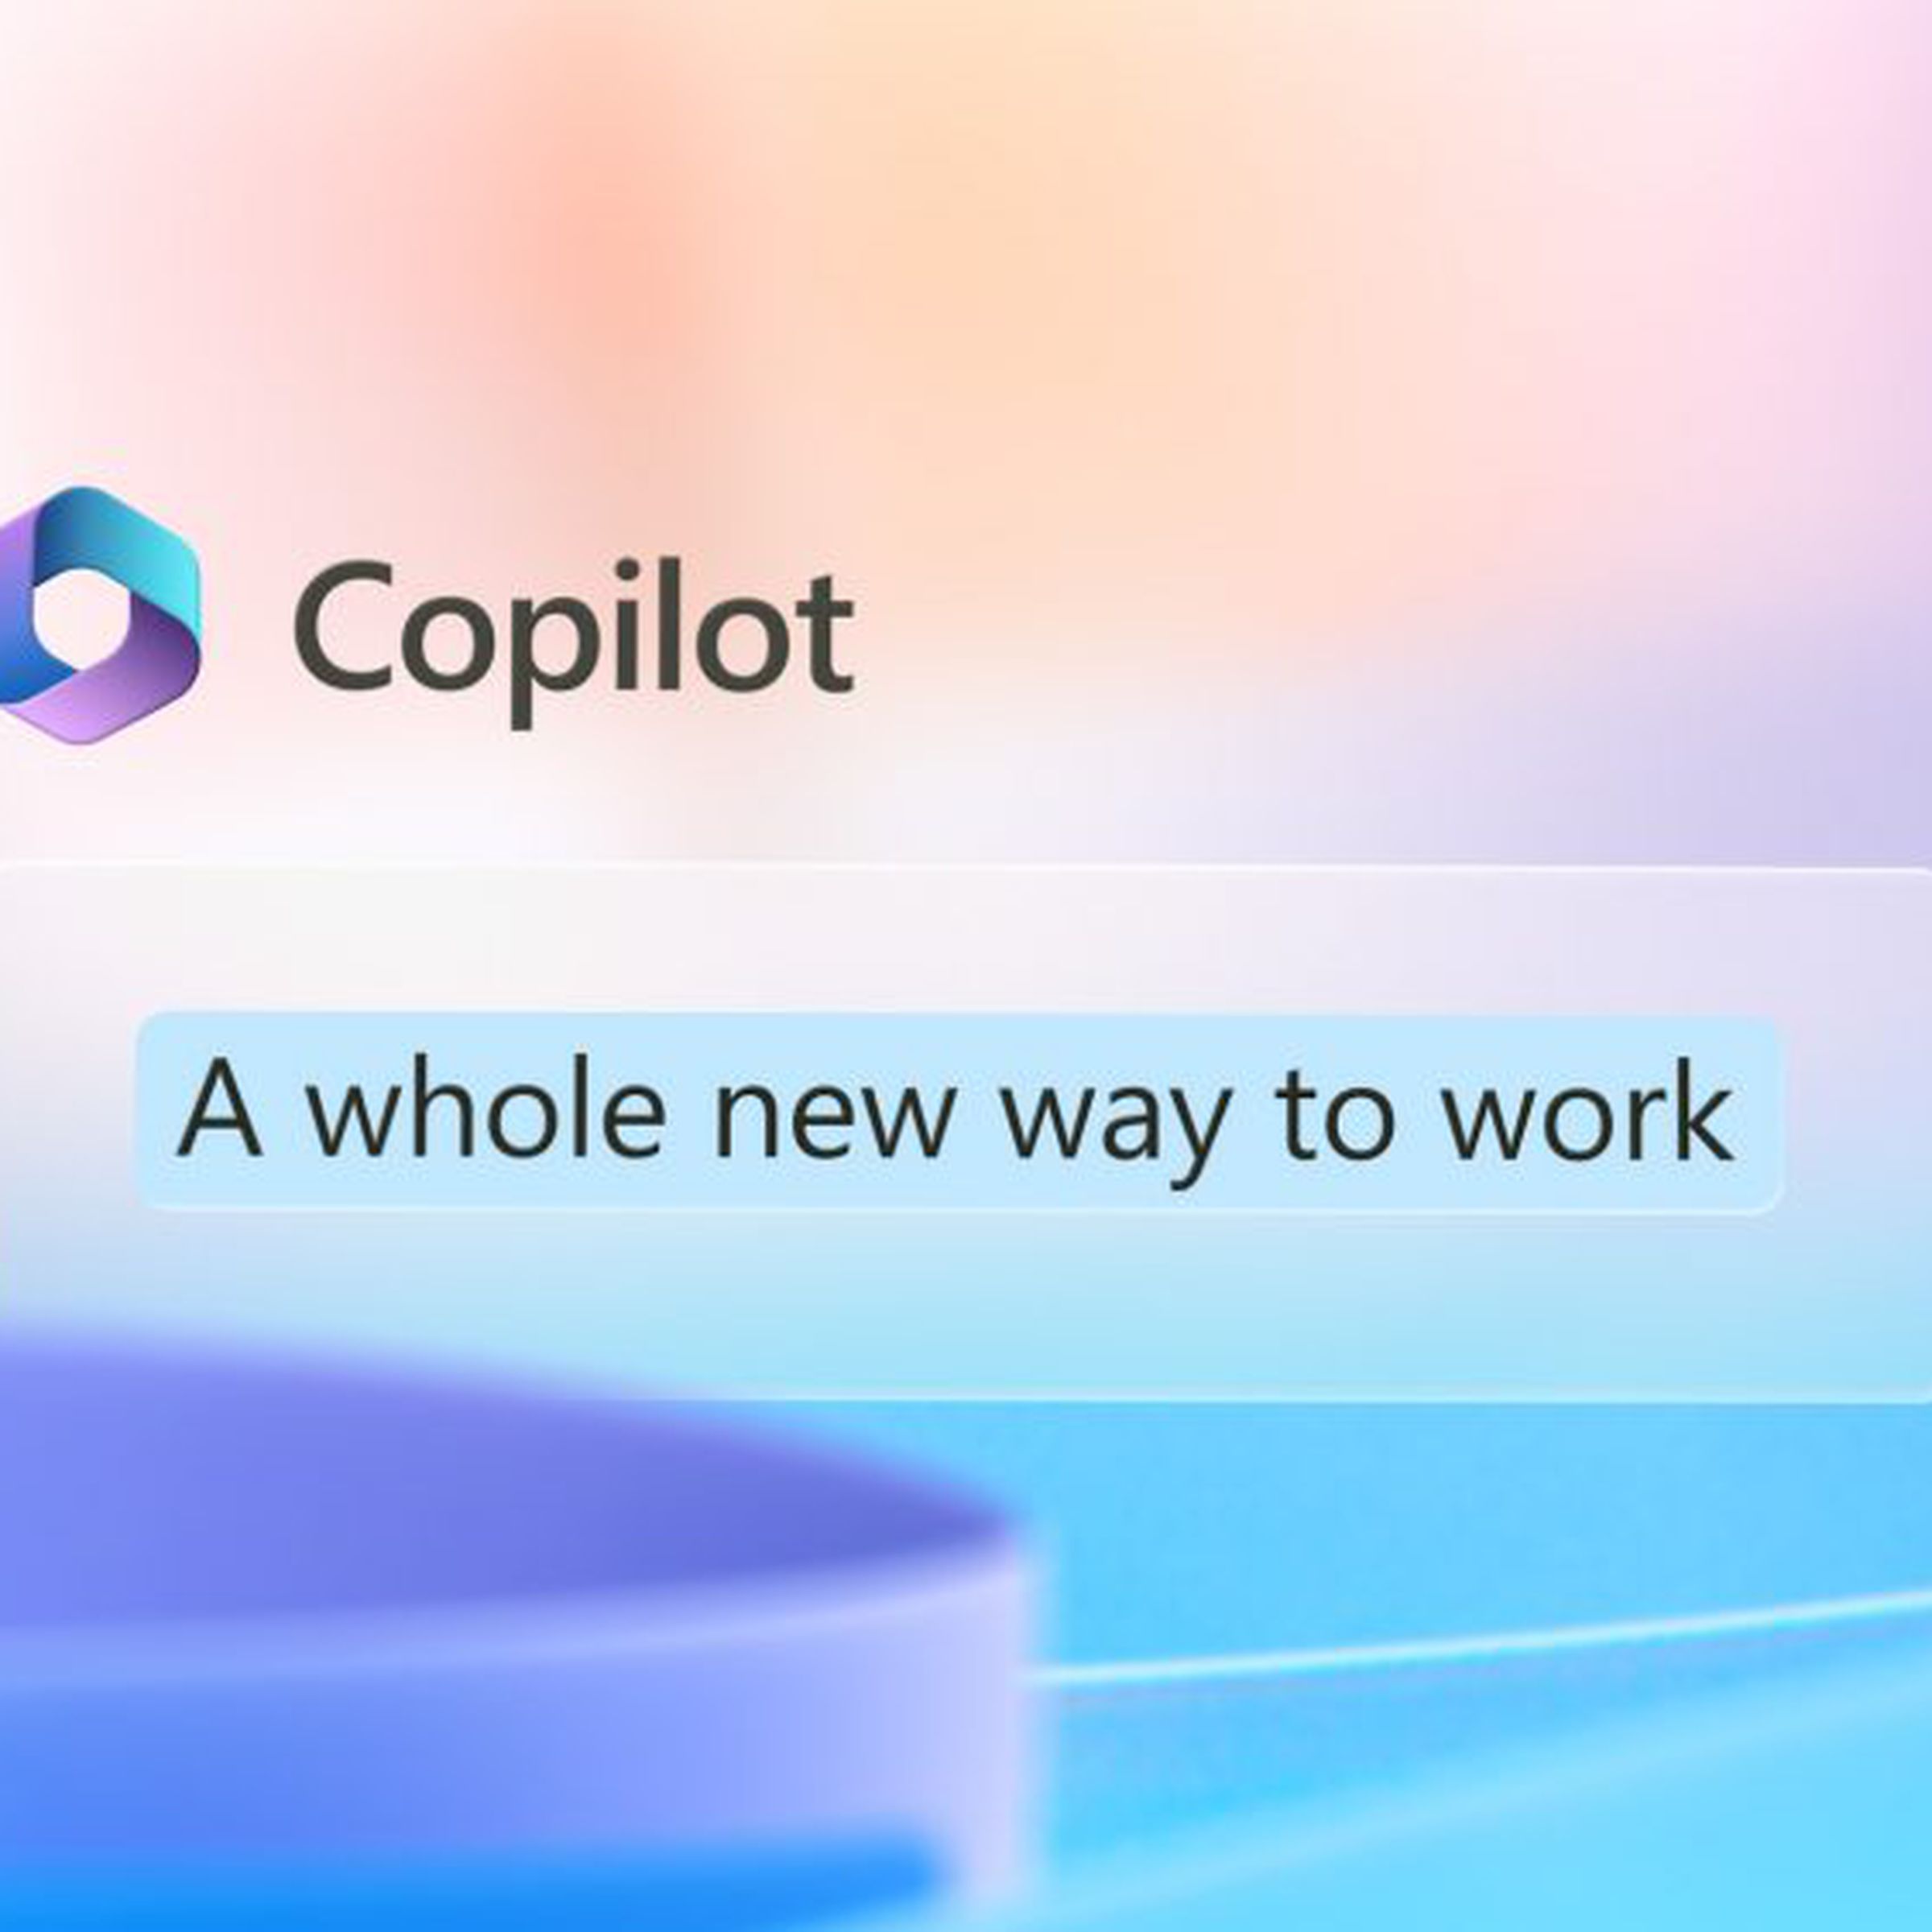 Microsoft’s new Copolit is an AI assistant for Office apps.